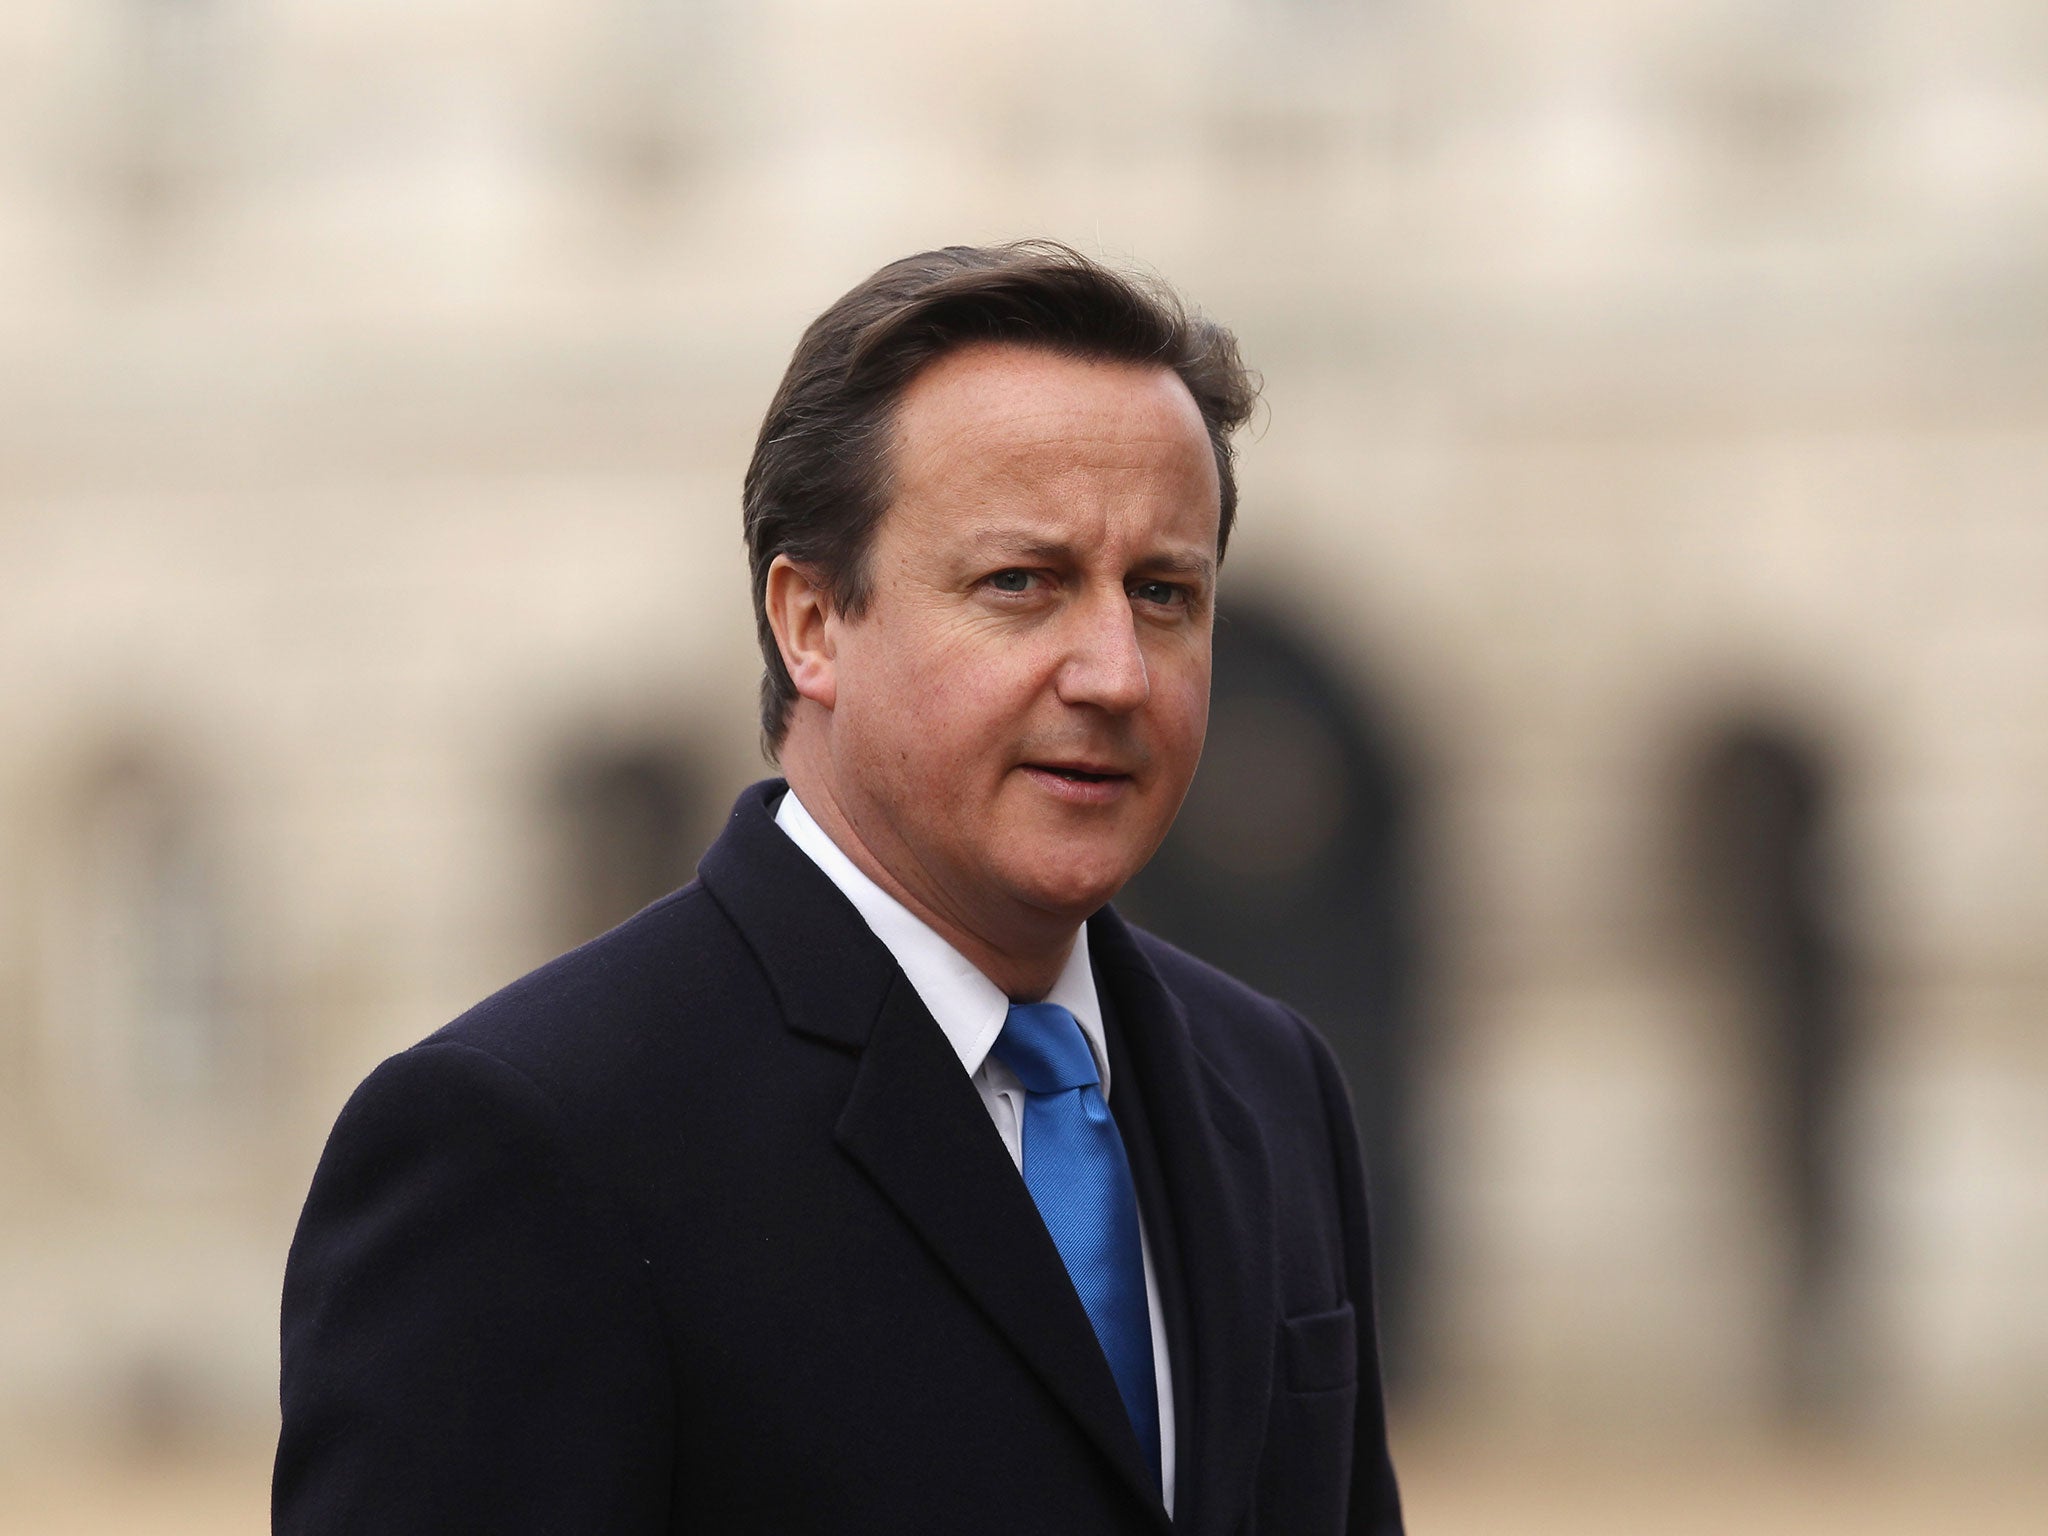 David Cameron has said the Islamic State poses a threat to Britain's safety